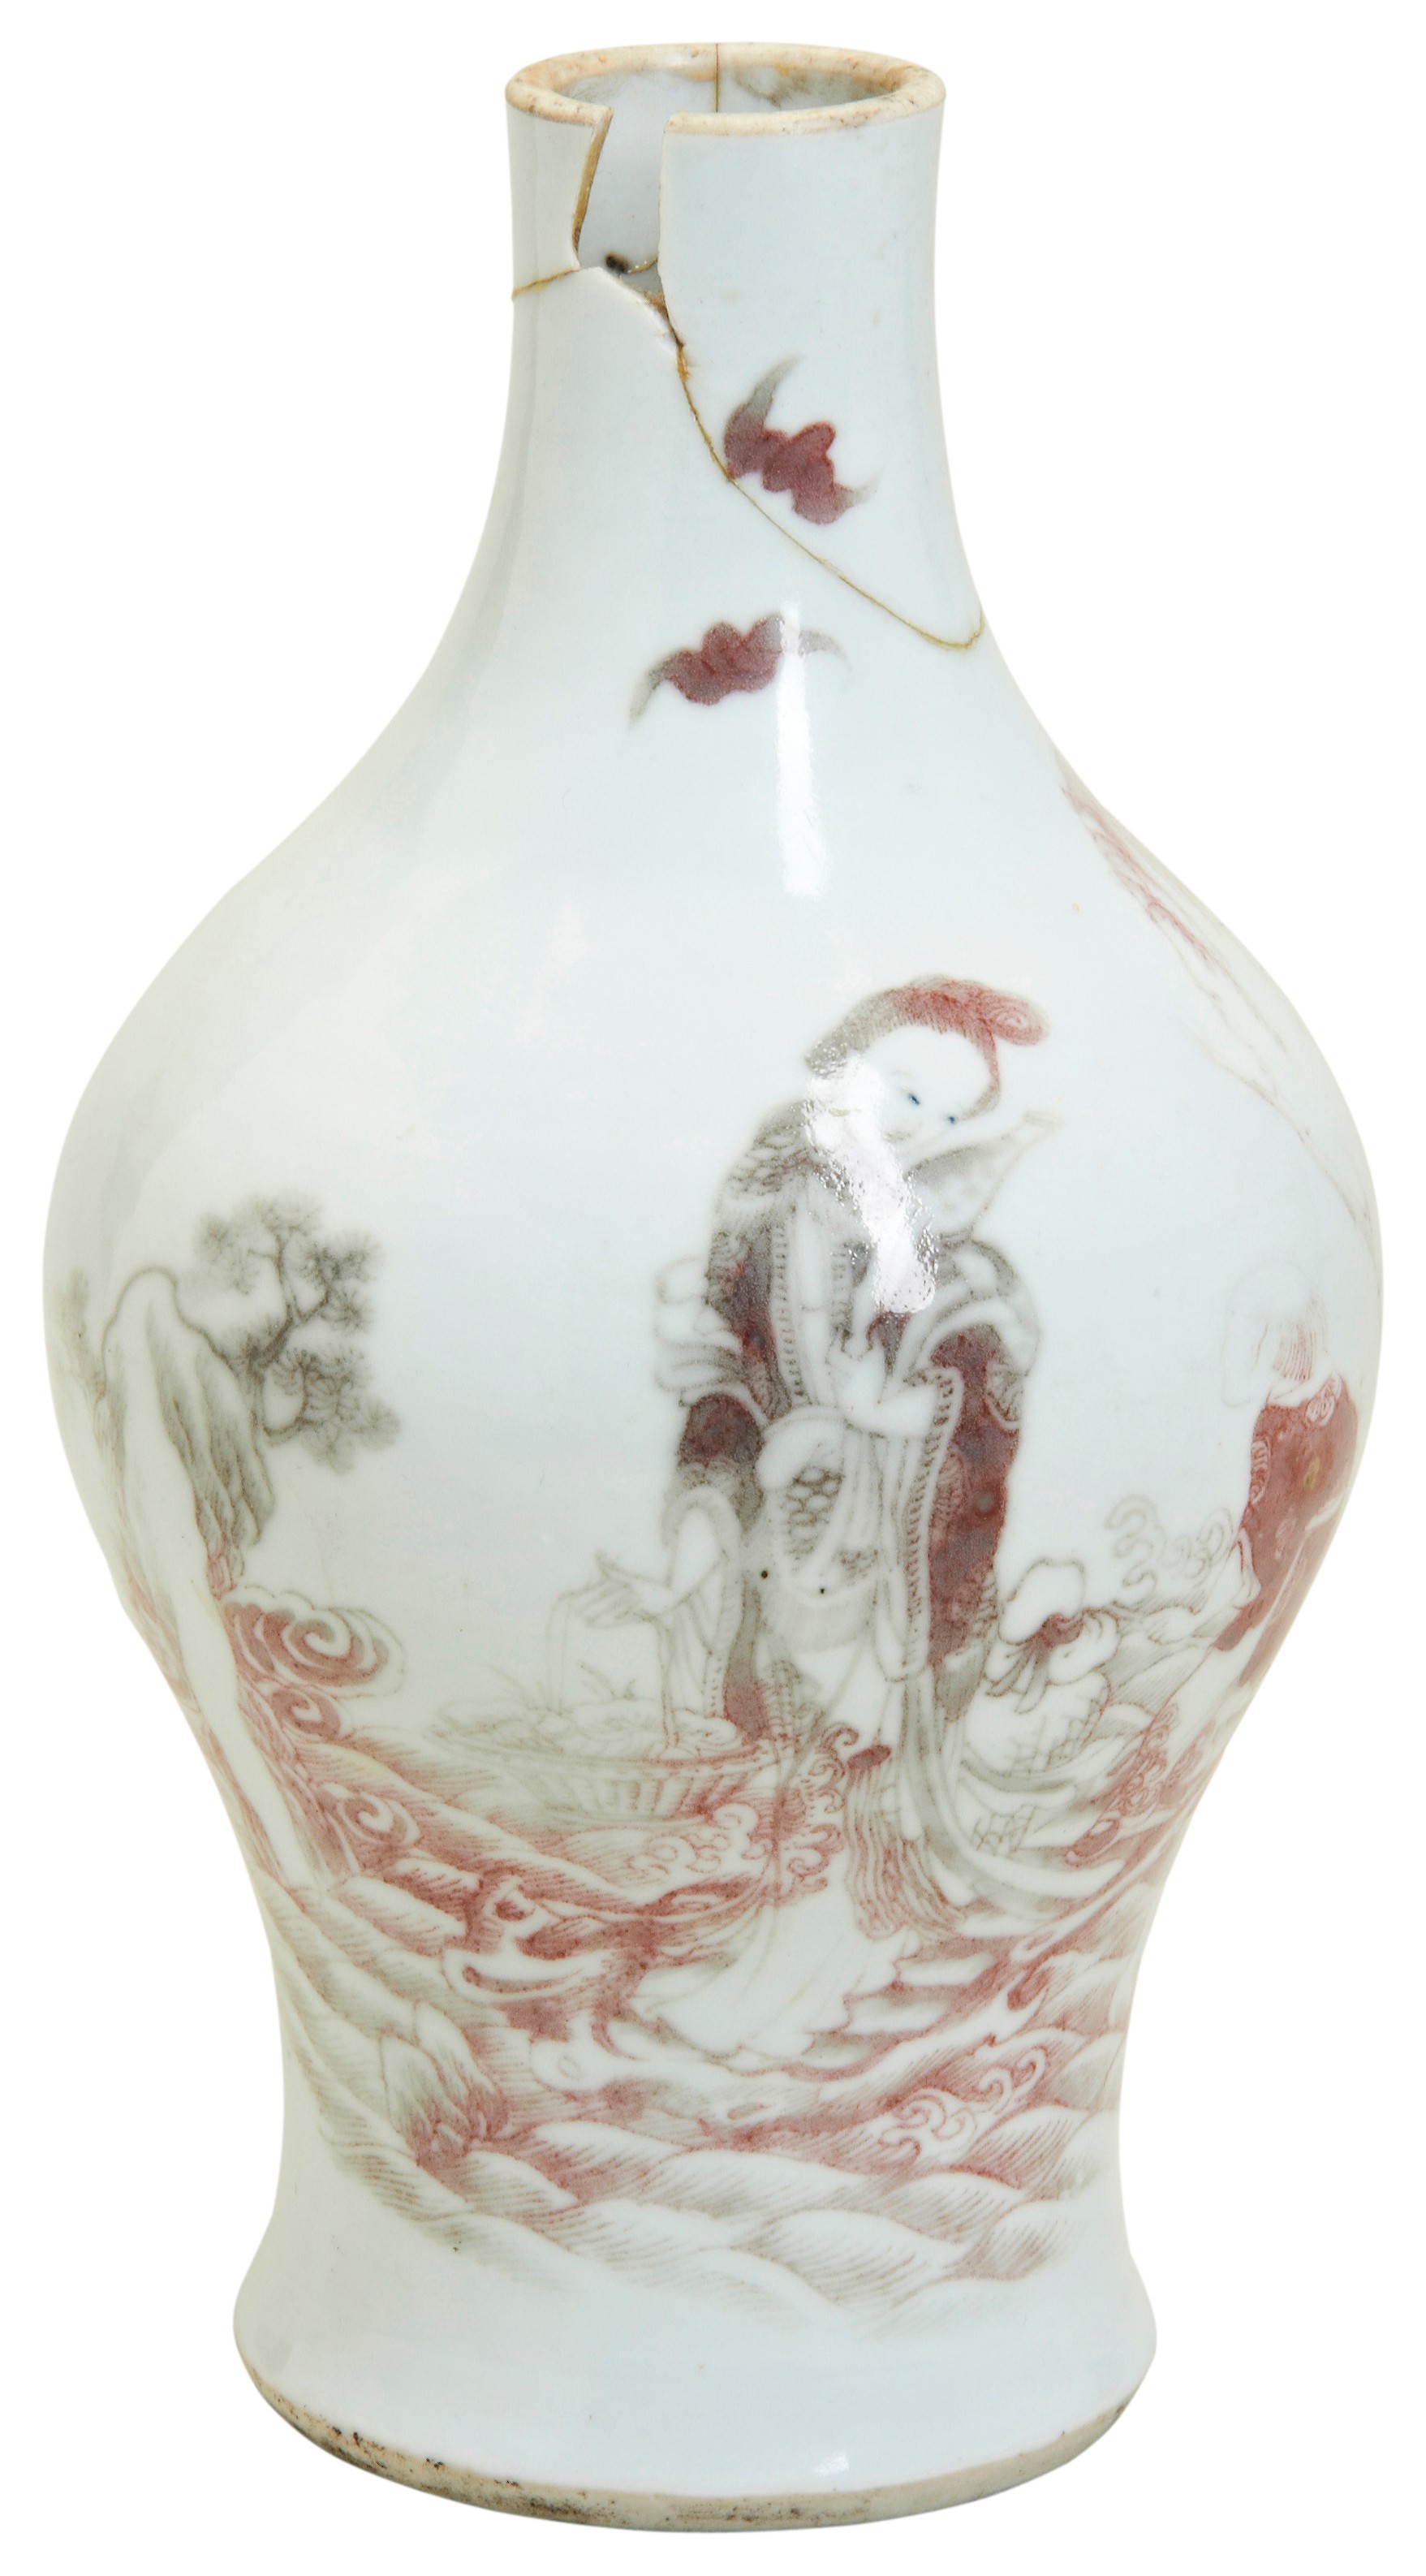 A SMALL COPPER-RED-DECORATED BALUSTER VASE QING DYNASTY, 18TH / 19TH CENTURY finely decorated with a